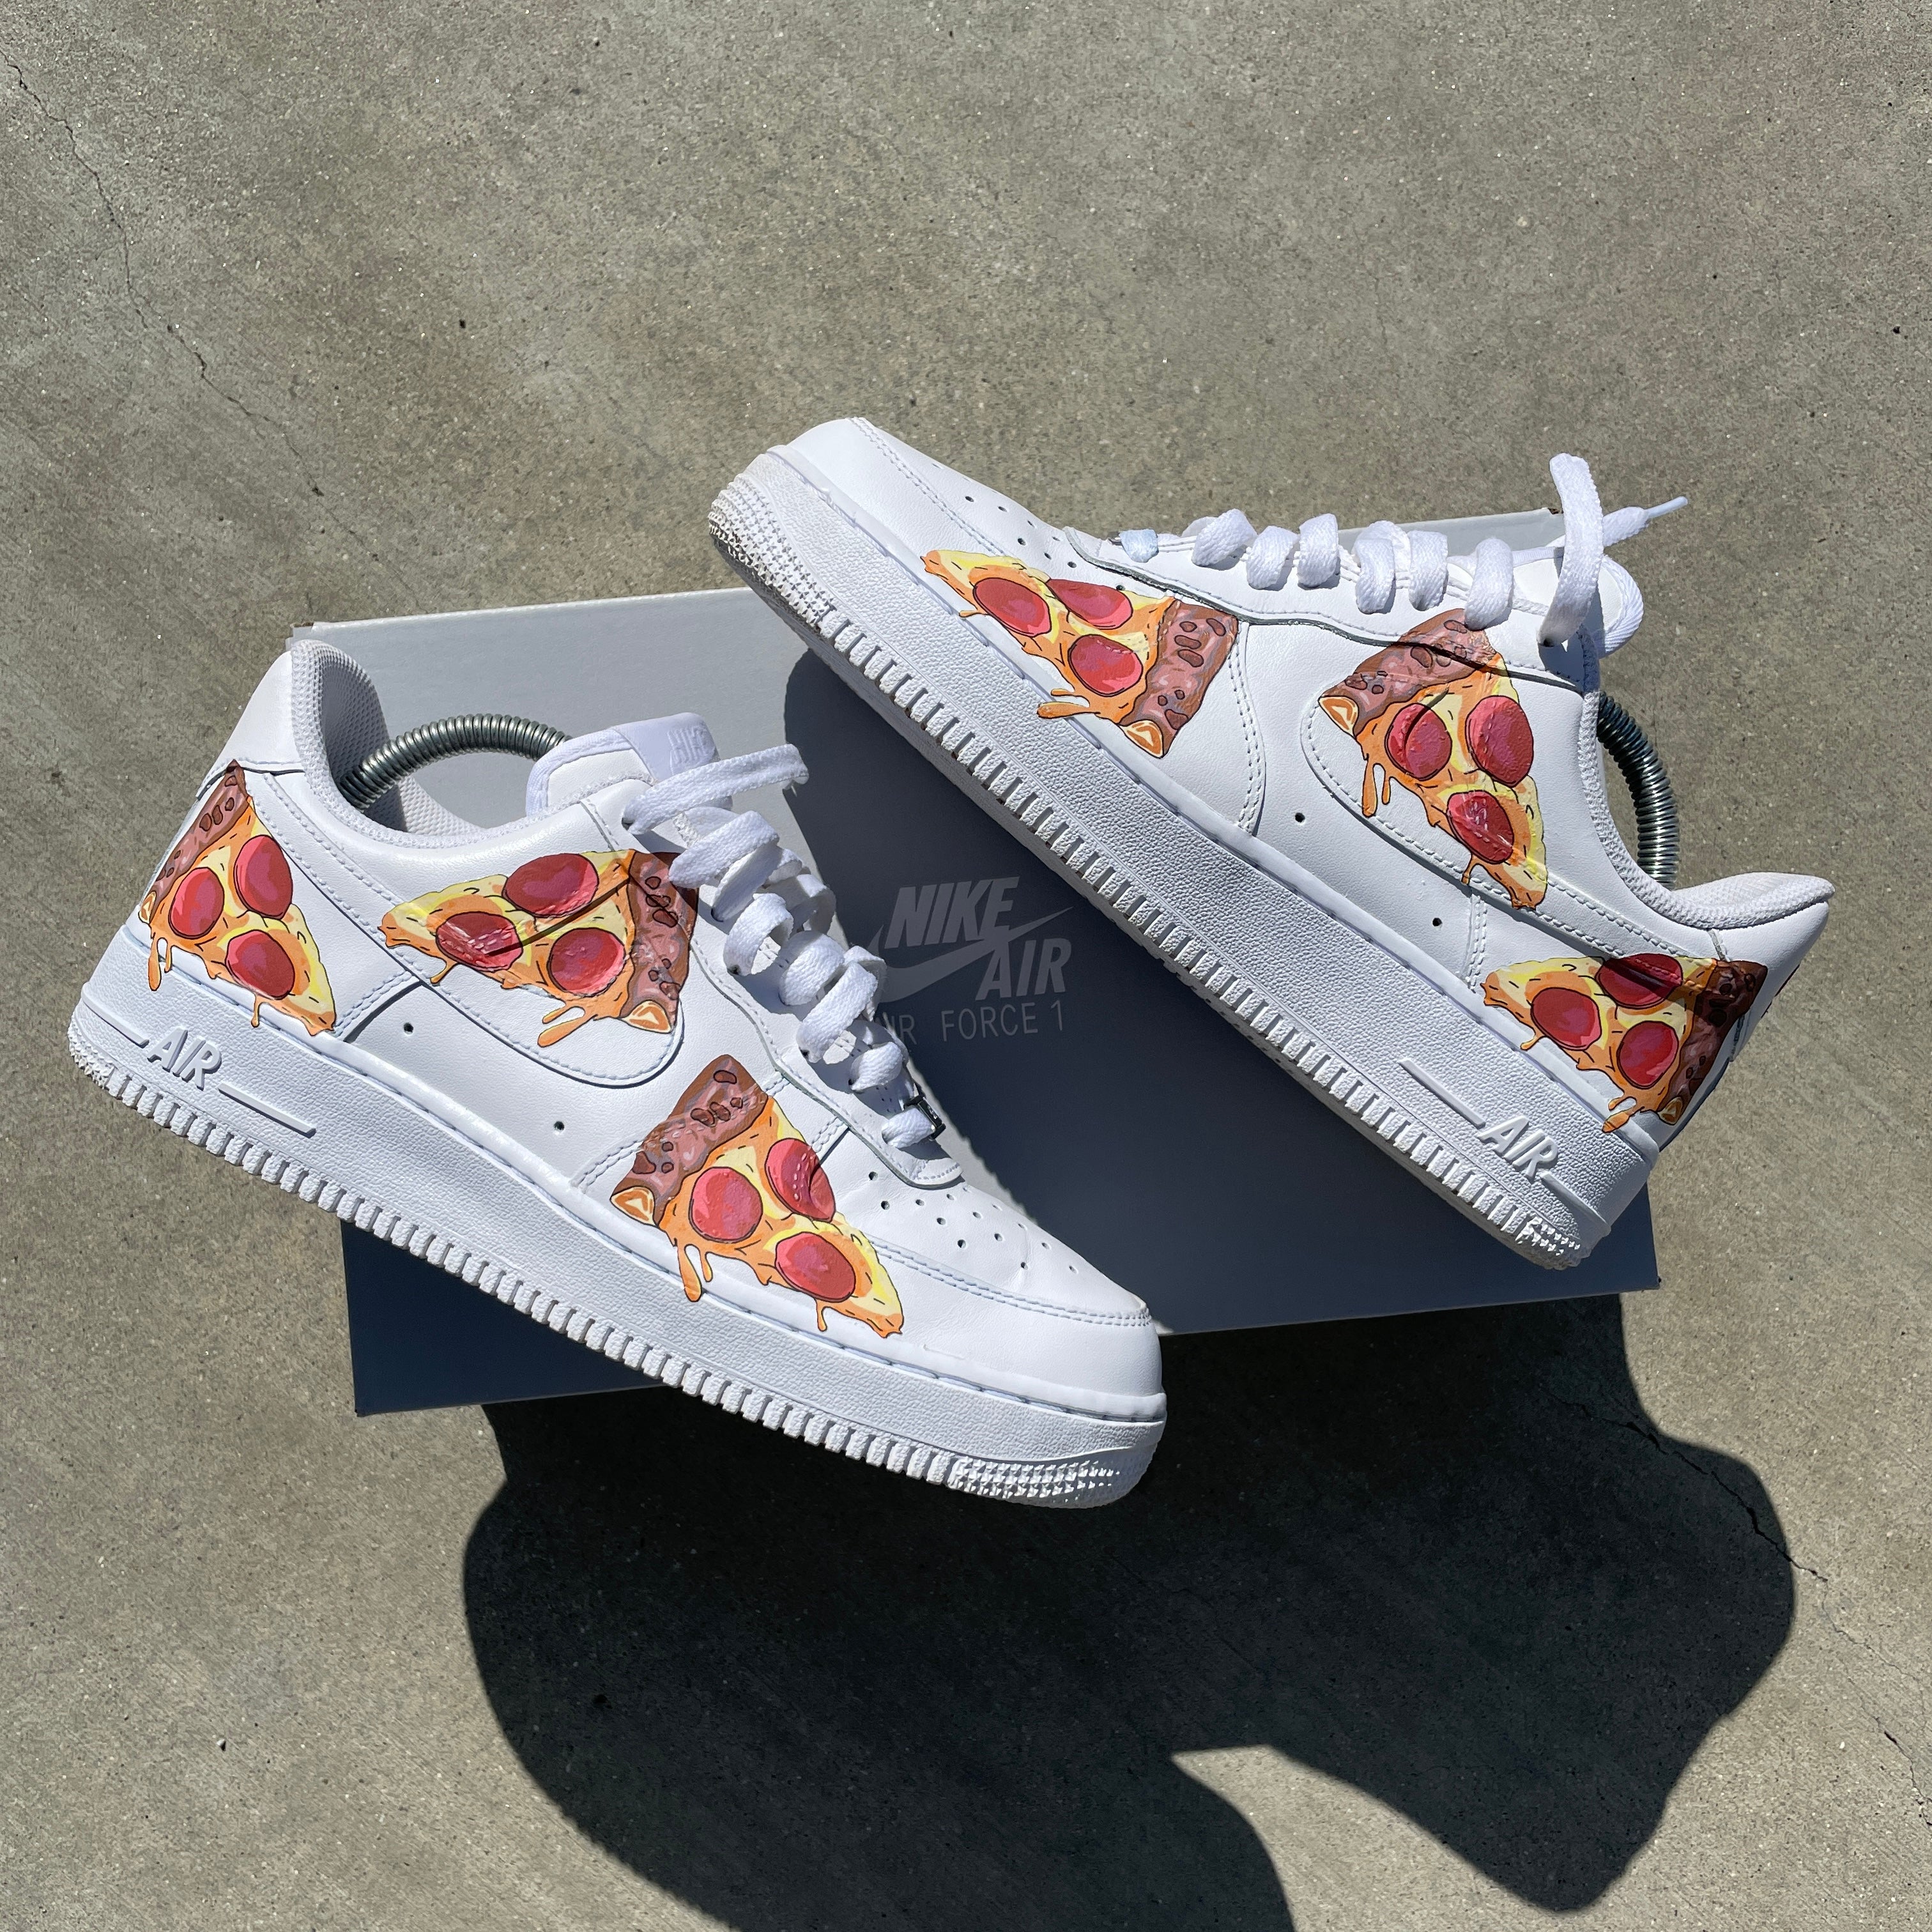 Unbox Therapy - These Pizza Hut sneakers have the ability... | Facebook